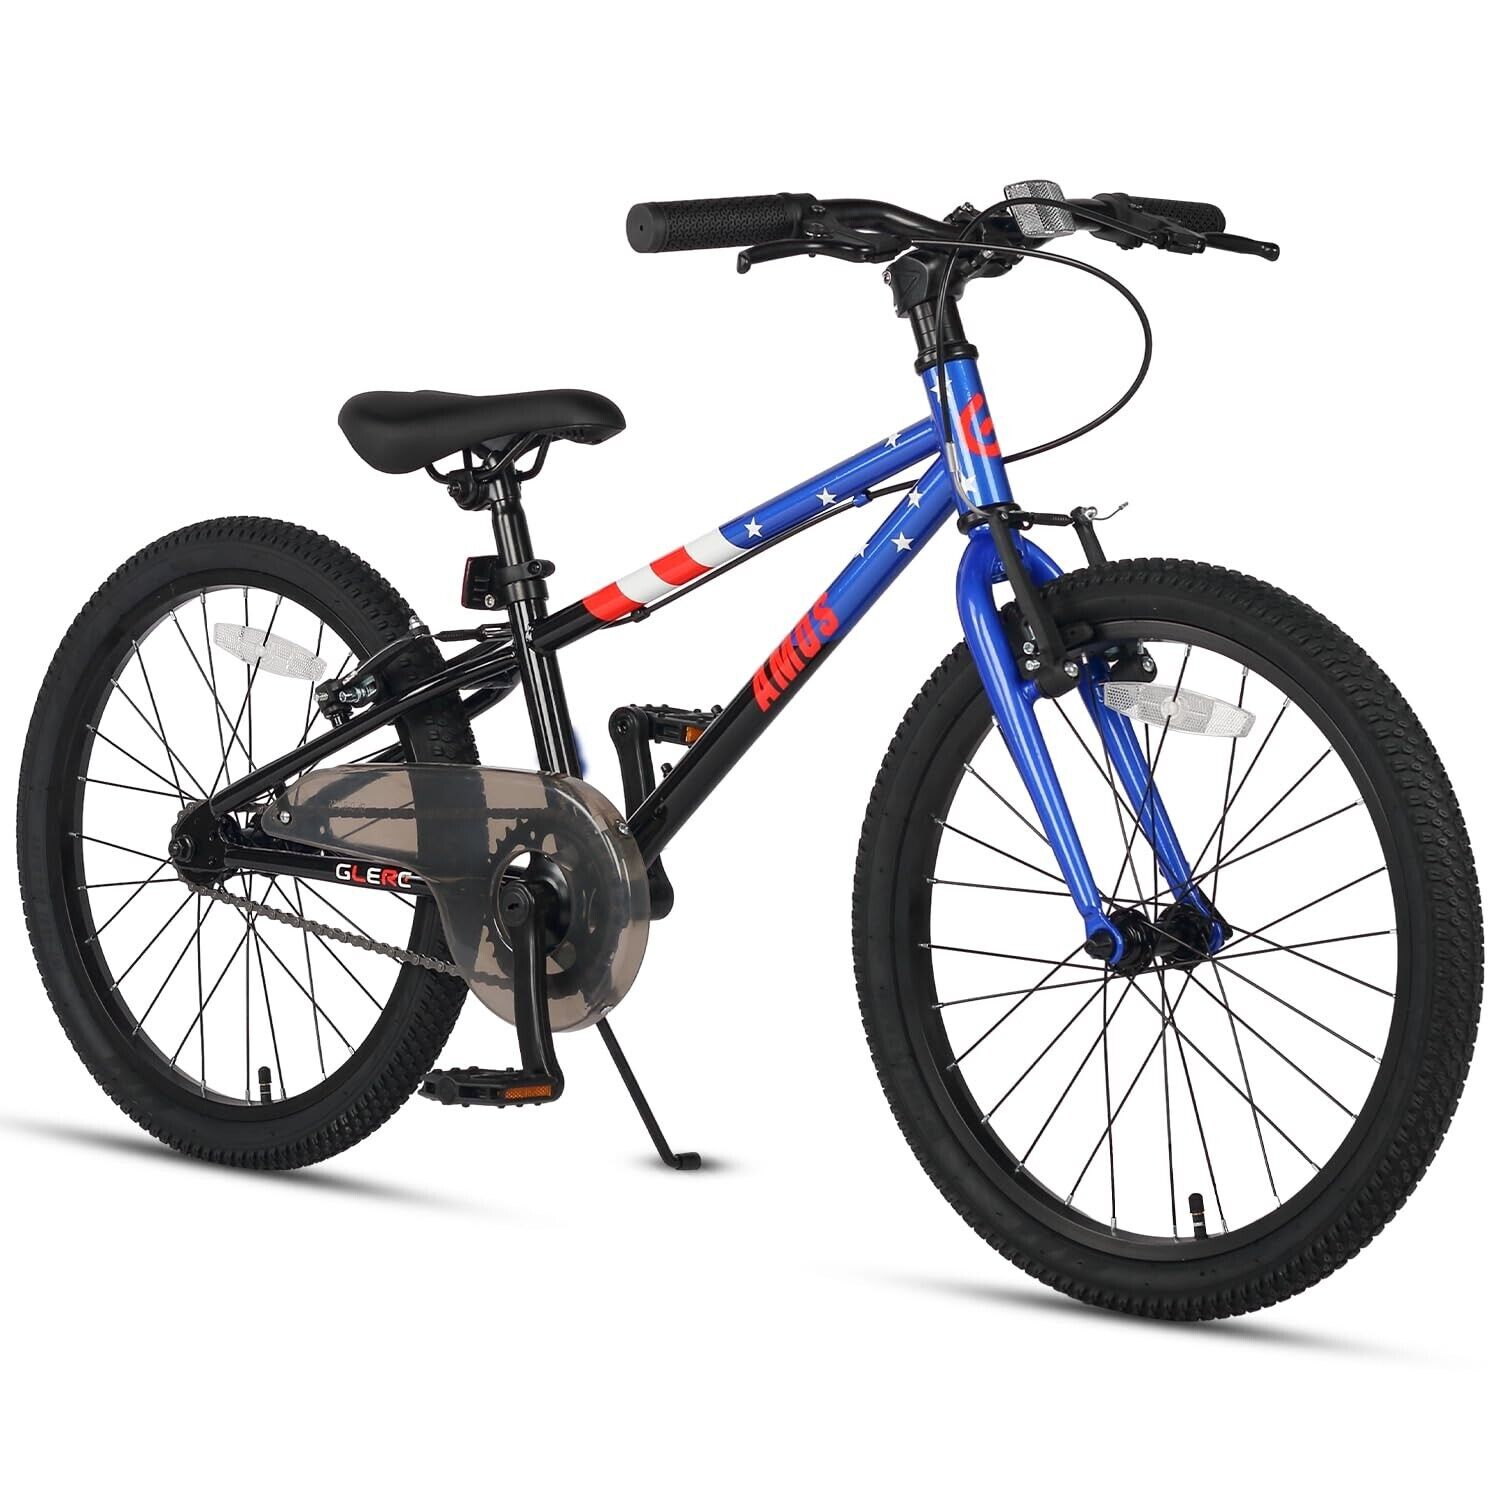 Amos 16 20 inch Kids Road Bike for 4-9 Year Old Boys Girls, Multiple Colors